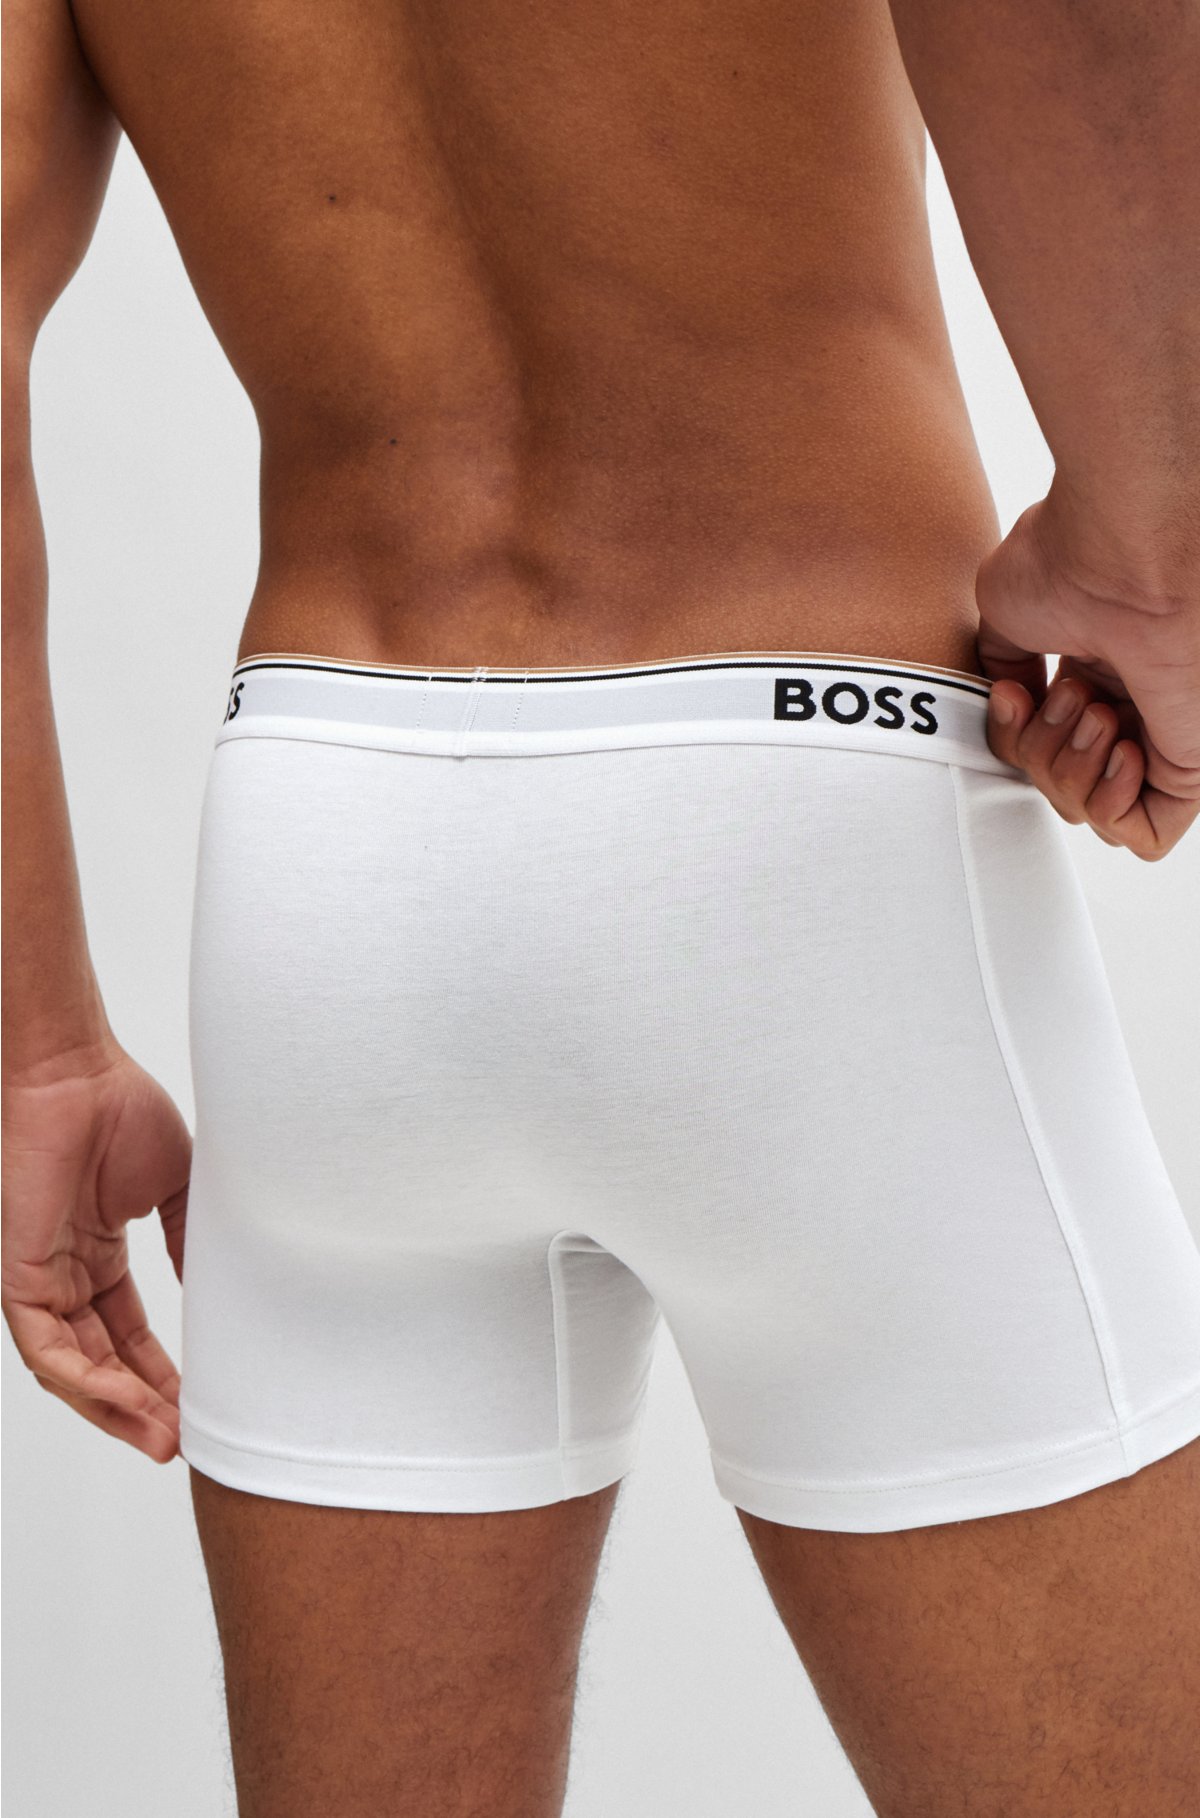 of - logos BOSS boxer stretch-cotton briefs with Three-pack